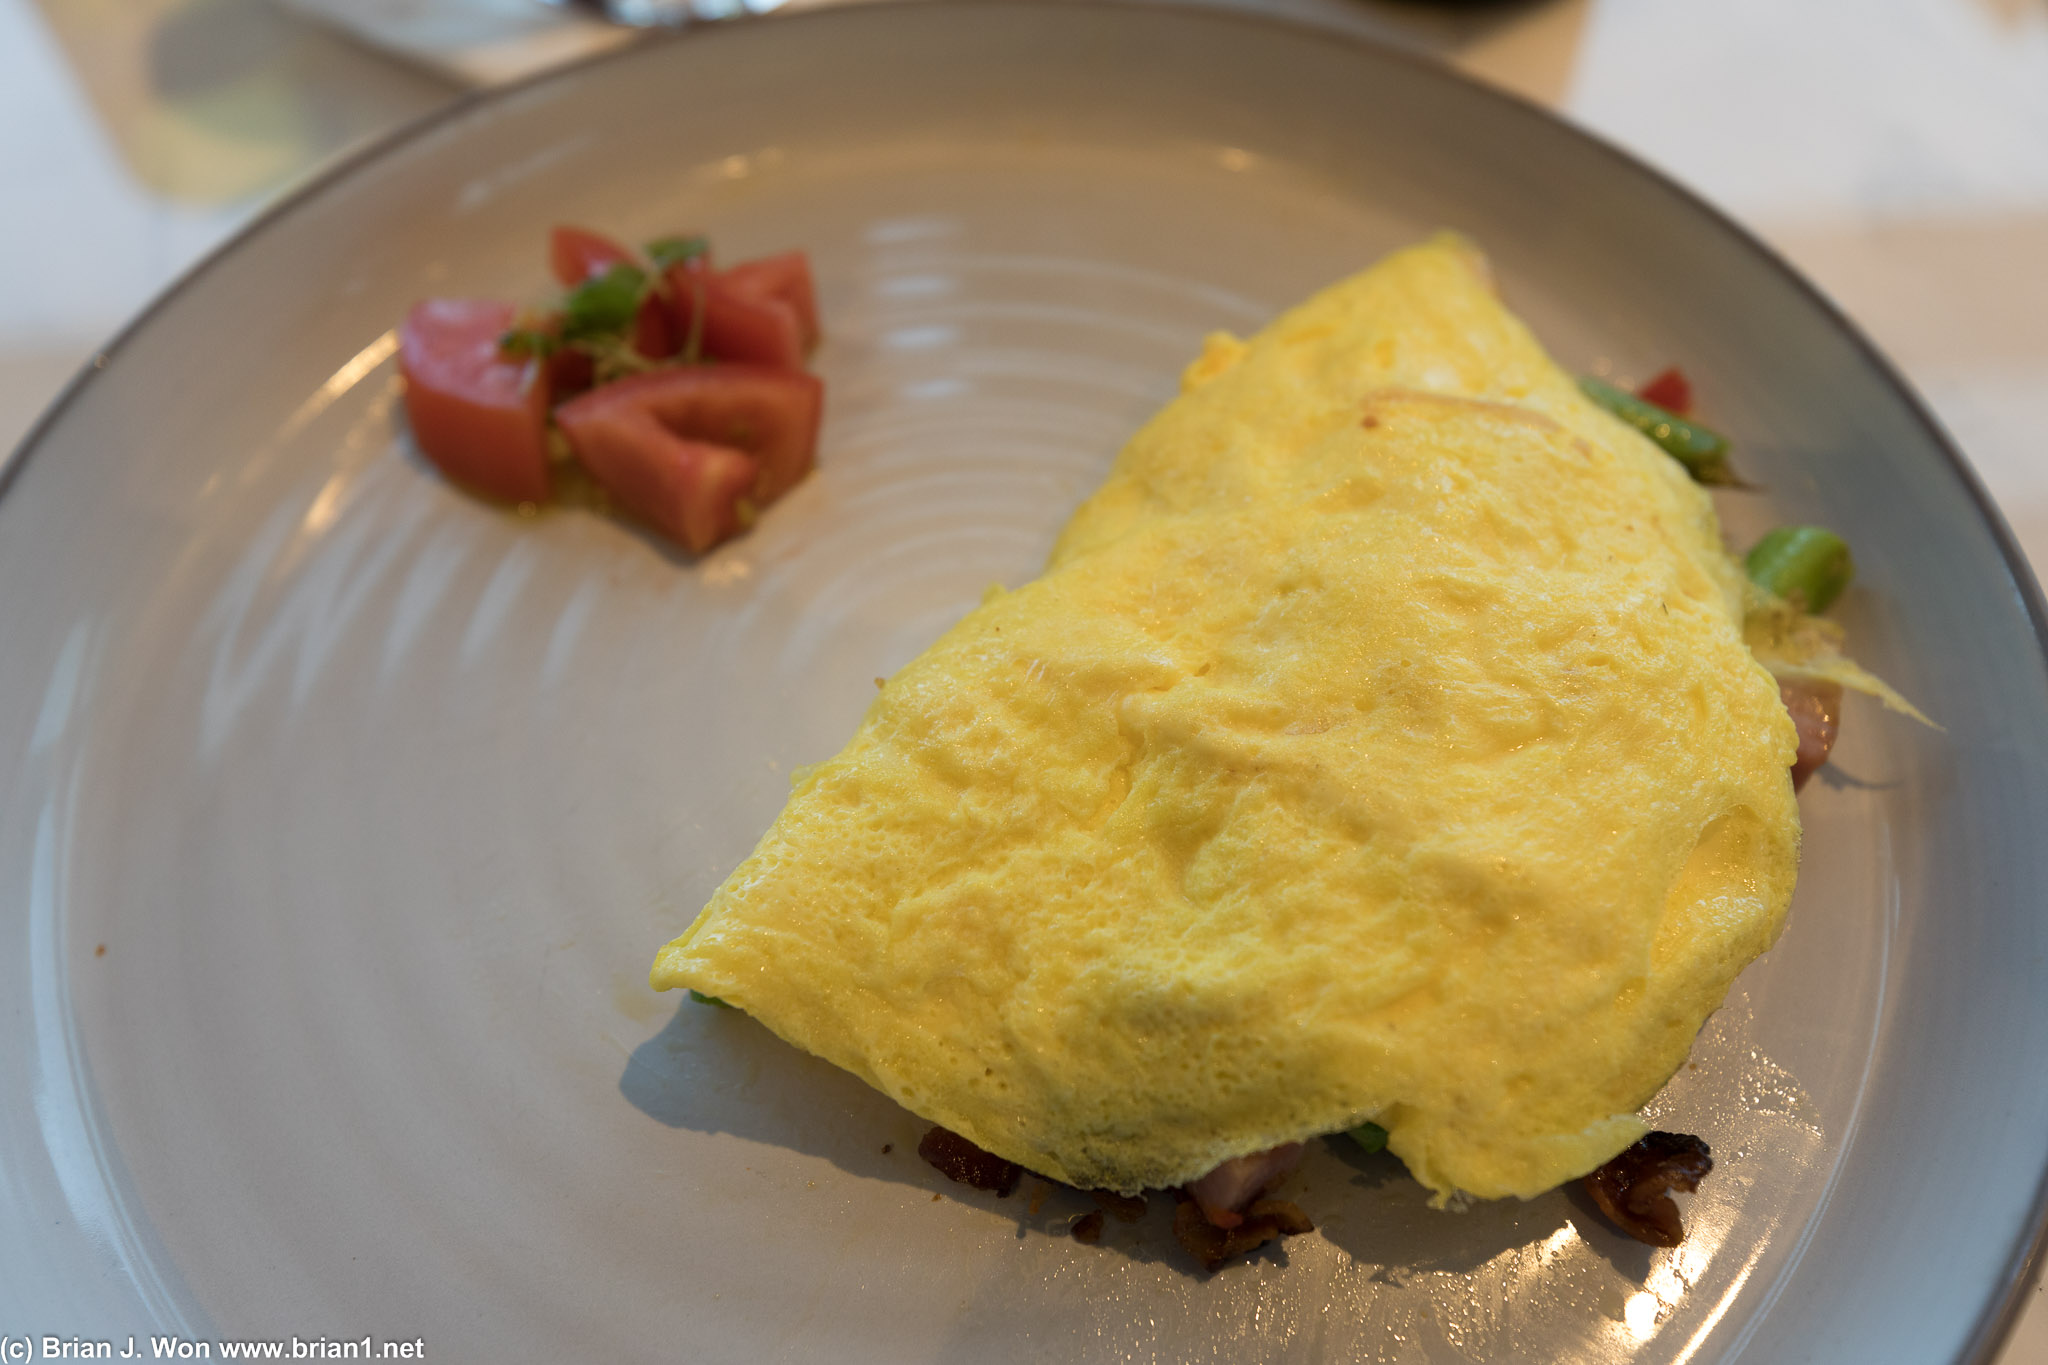 Omelette was passable.